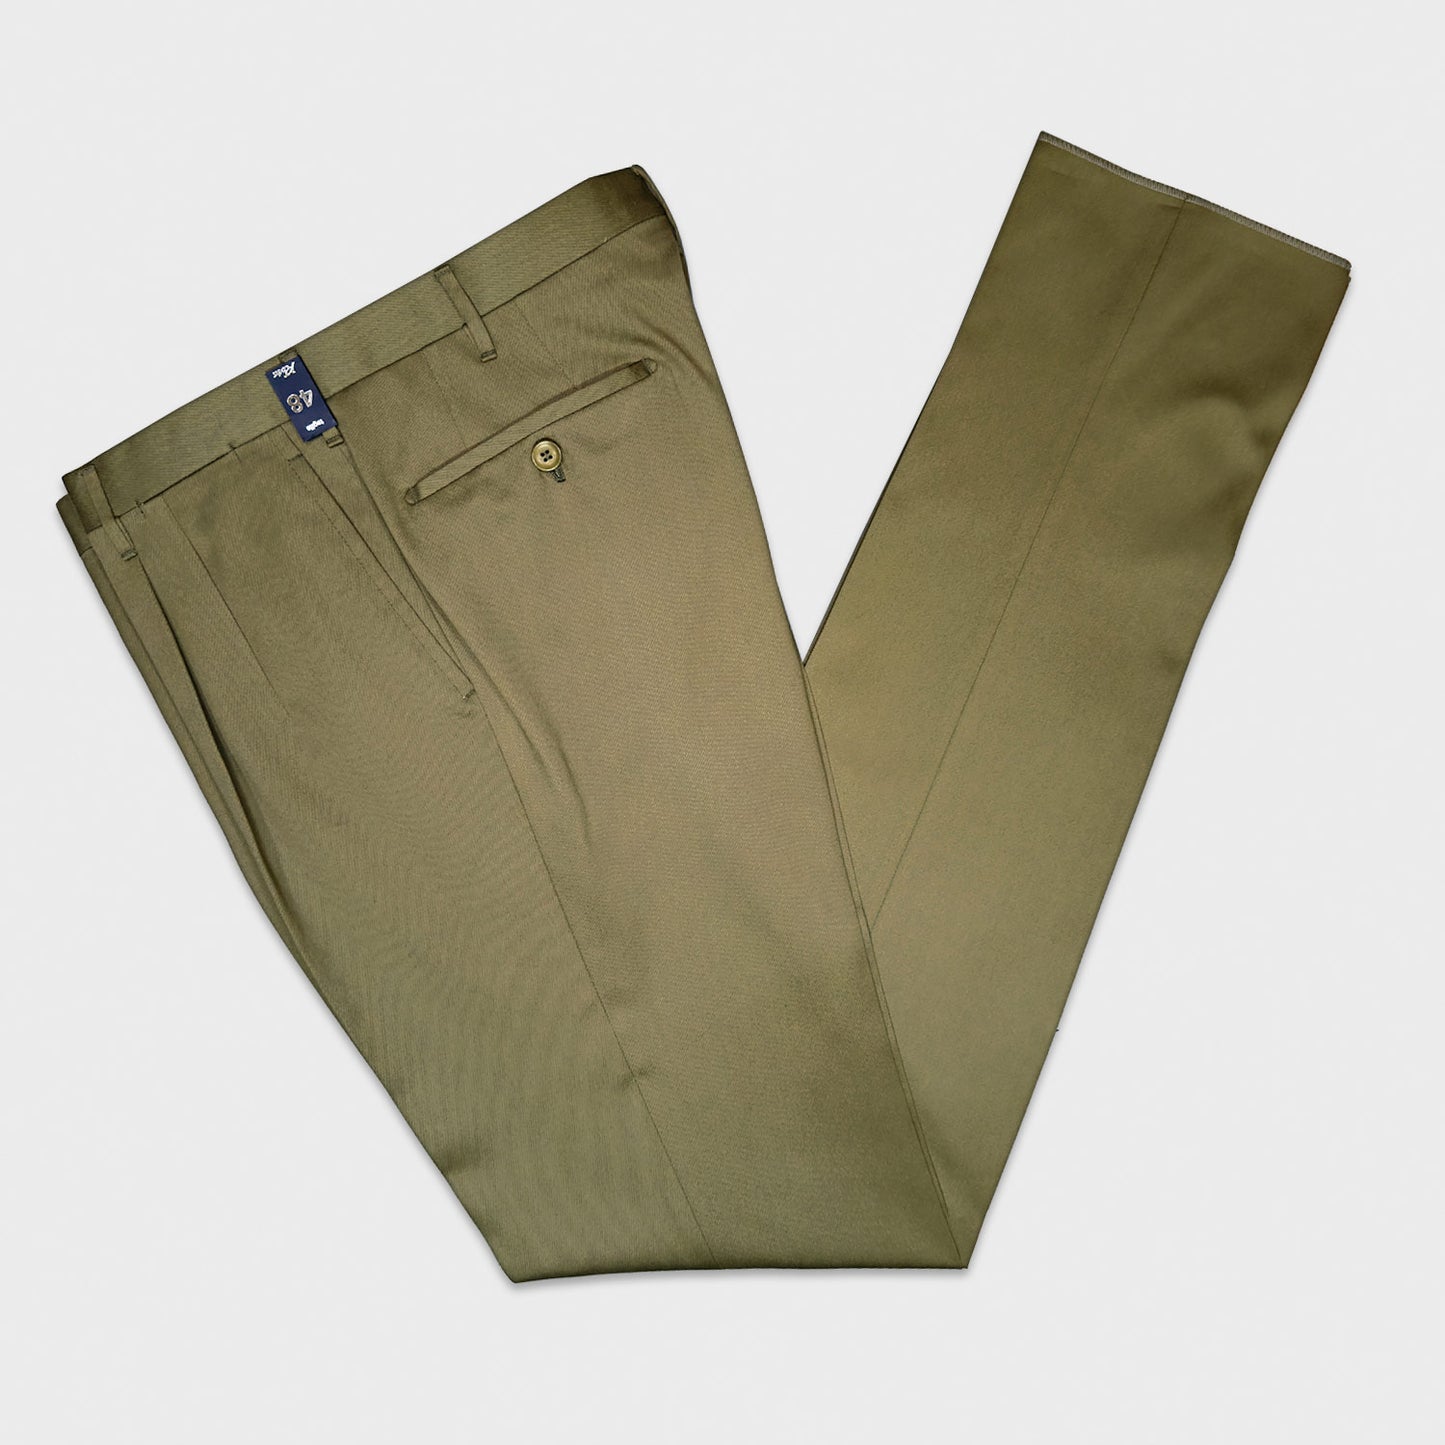 Tailored cotton trousers double pleats army green color, handmade in Italy by Rota Pantaloni, made with luxury cotton twill British fabric made by Brisbane Moss, high rise classic fit, four pockets